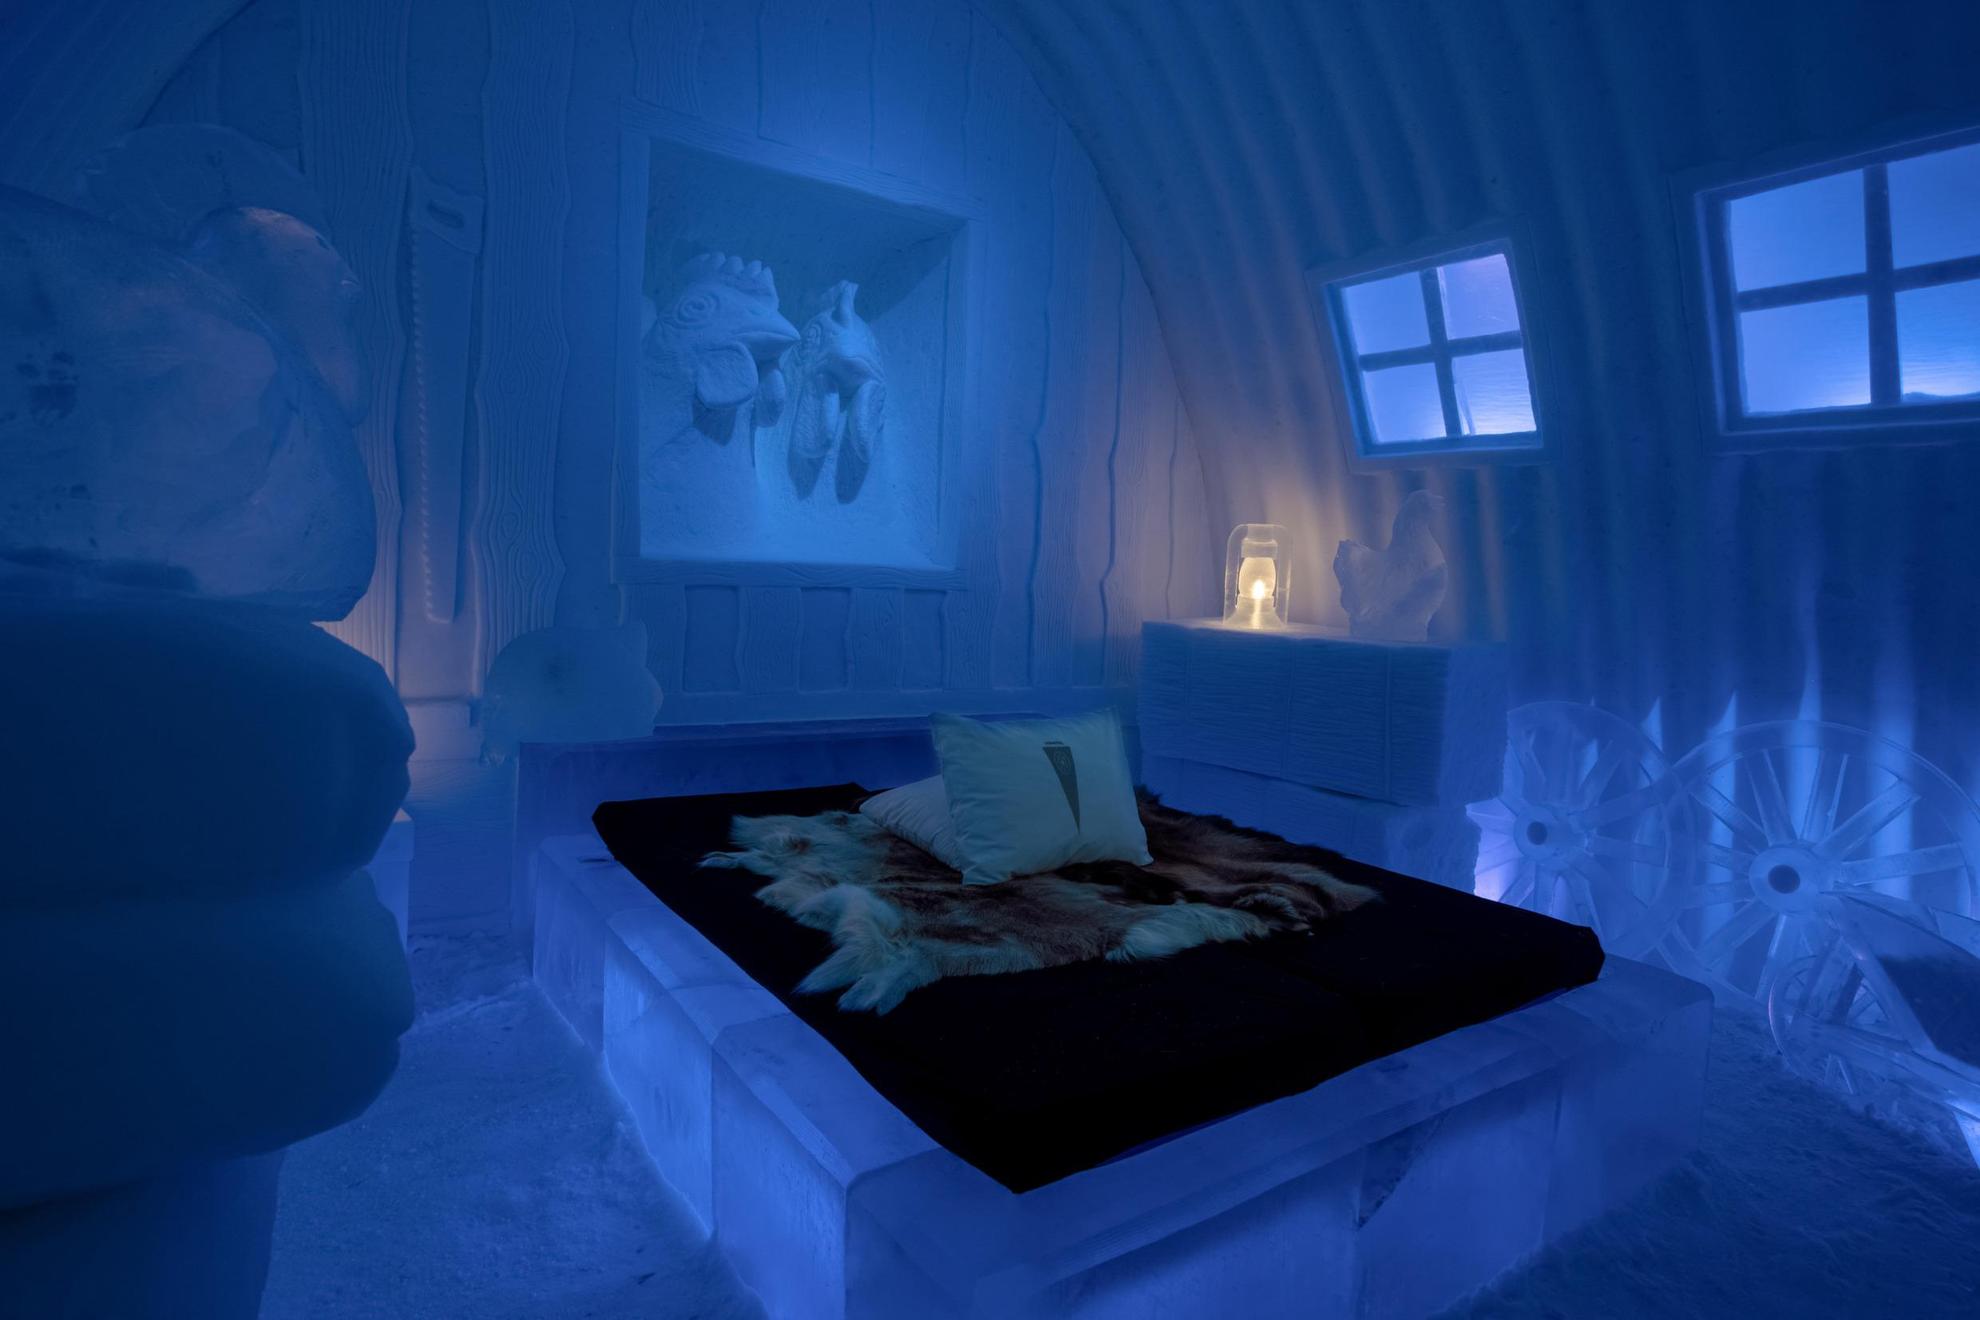 A hotel room made out of ice. Sculptures of chickens made out of ice and snow decorates the room.